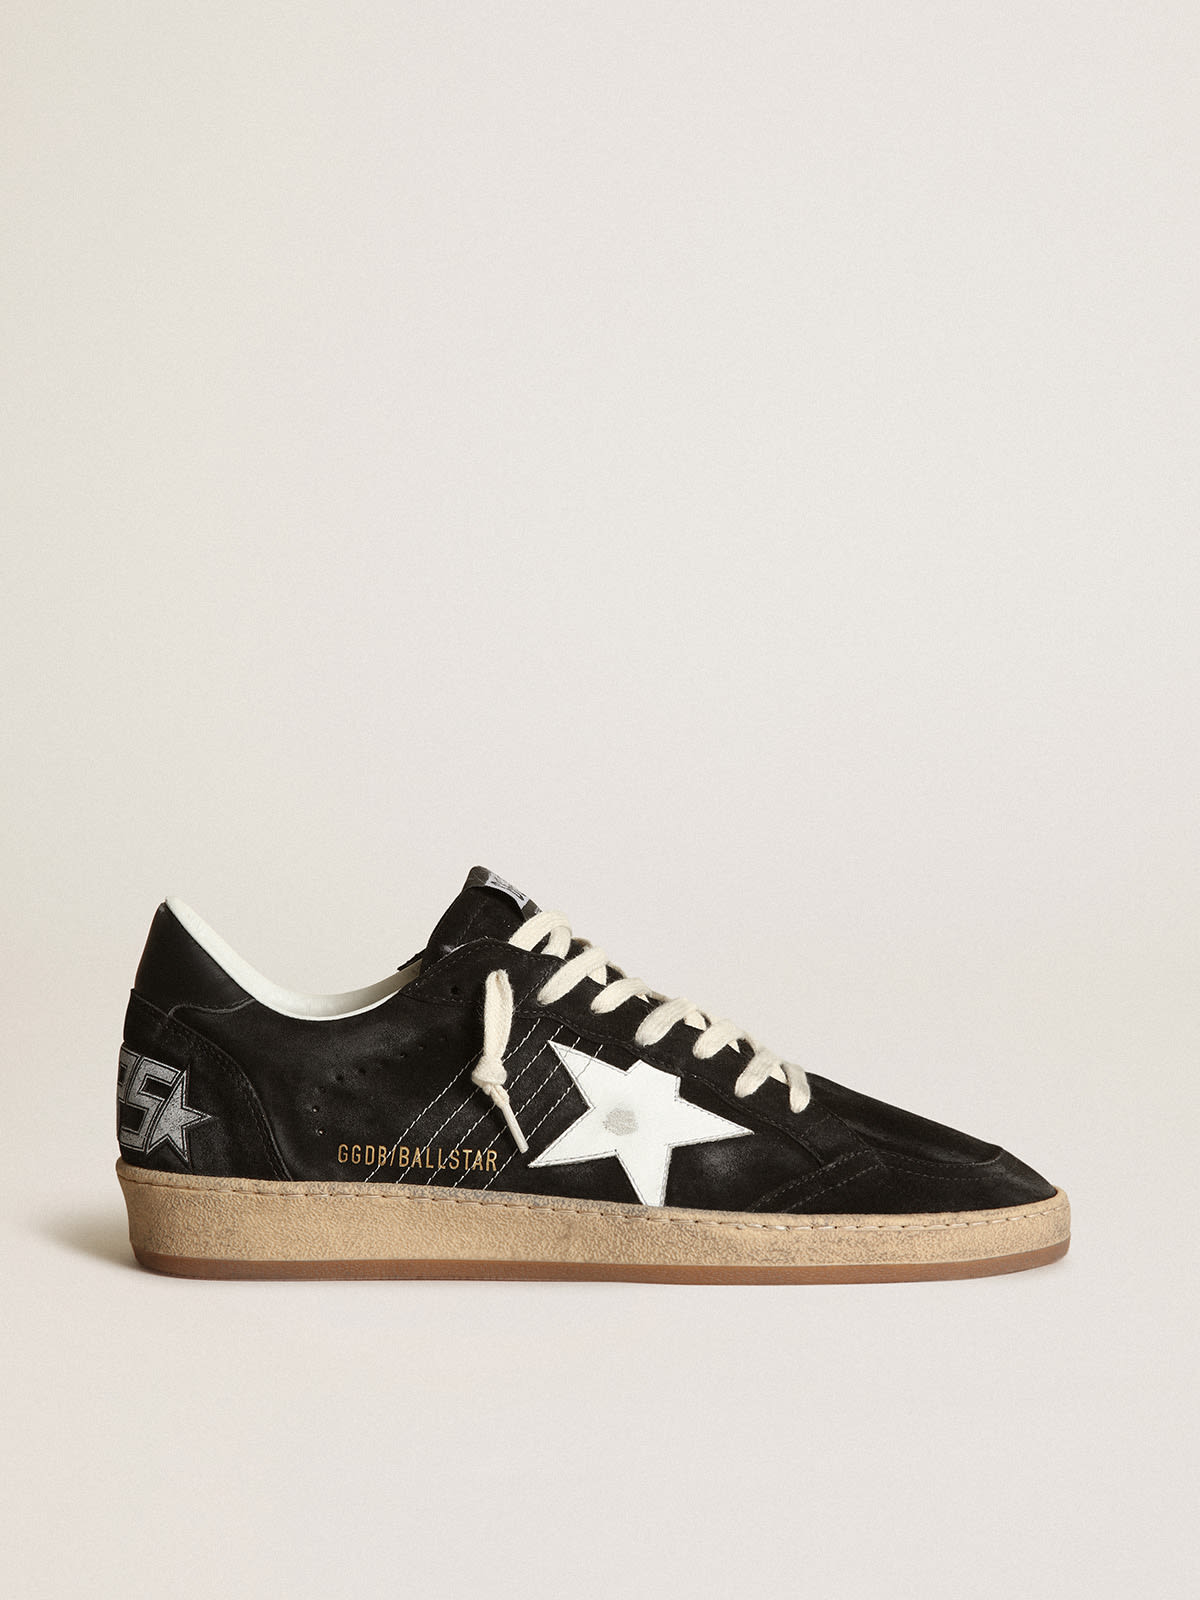 Golden Goose - Women’s Ball Star sneakers in black suede with white leather star and black leather heel tab in 